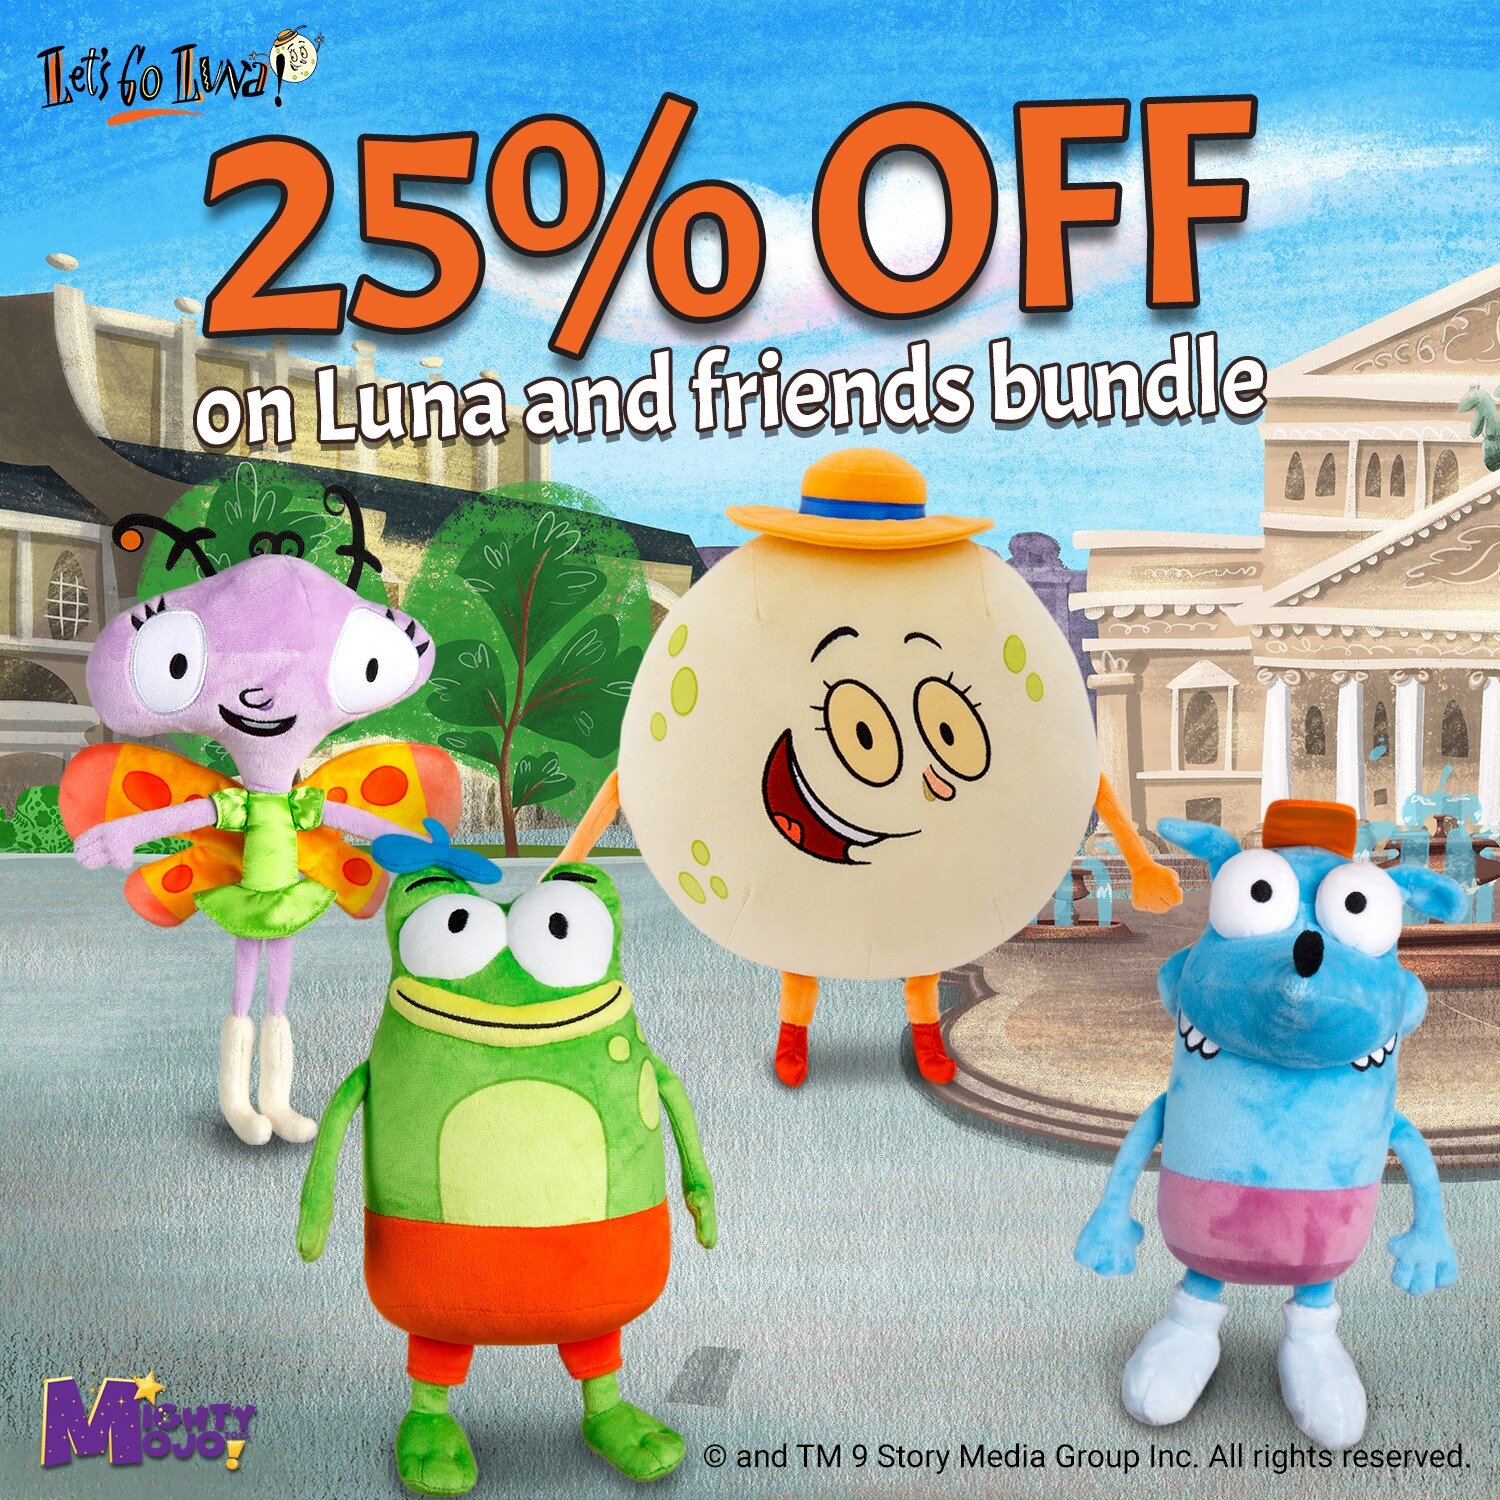 Save 25% on the Let's Go Luna Plush Bundle! Includes Luna, Leo, Carmen and Andy together. Hurry, expires November 28. Promo Code:25LETSGOV2 - Link in bio

 #mightymojotoys #blackfriday #blackfridaydeals #blackfridayweekend #blackfriday2022 #plushies 